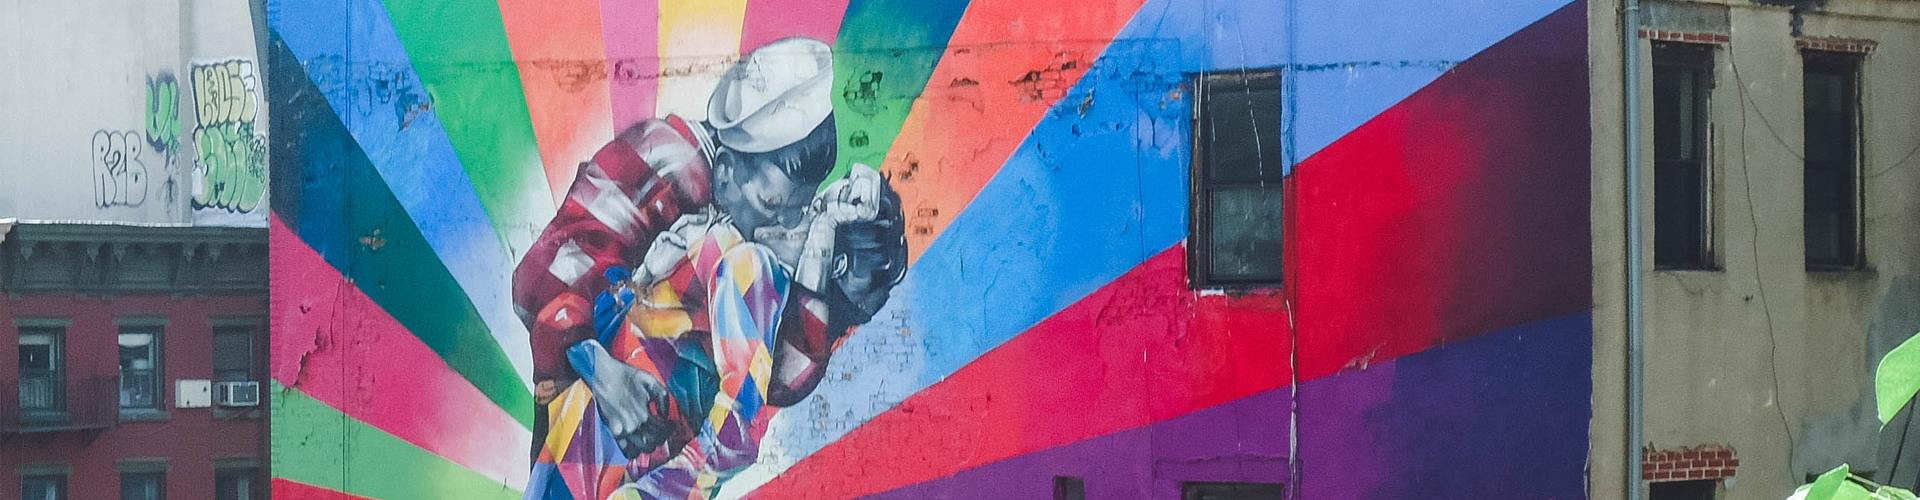 The Fascinating History of 2010s Art: What We Can Learn from the Street Art Era